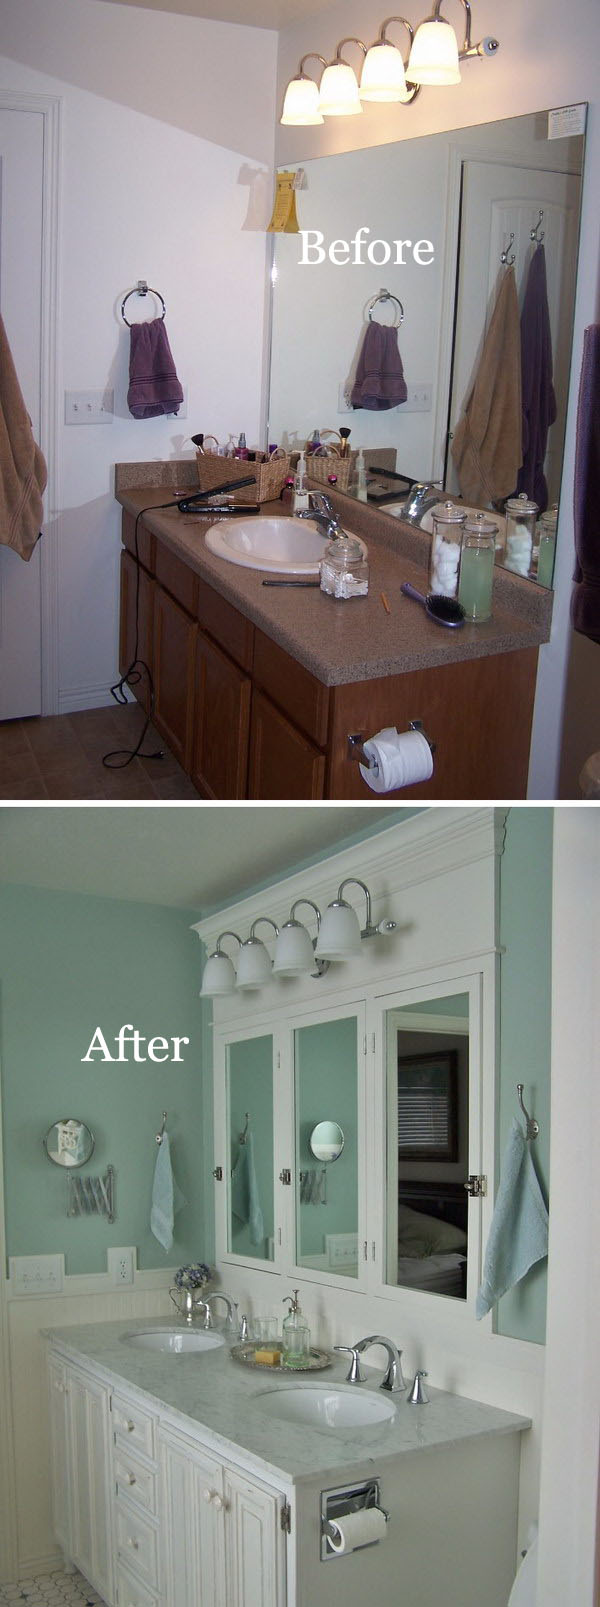 13-14-bathroom-remodel-before-and-after